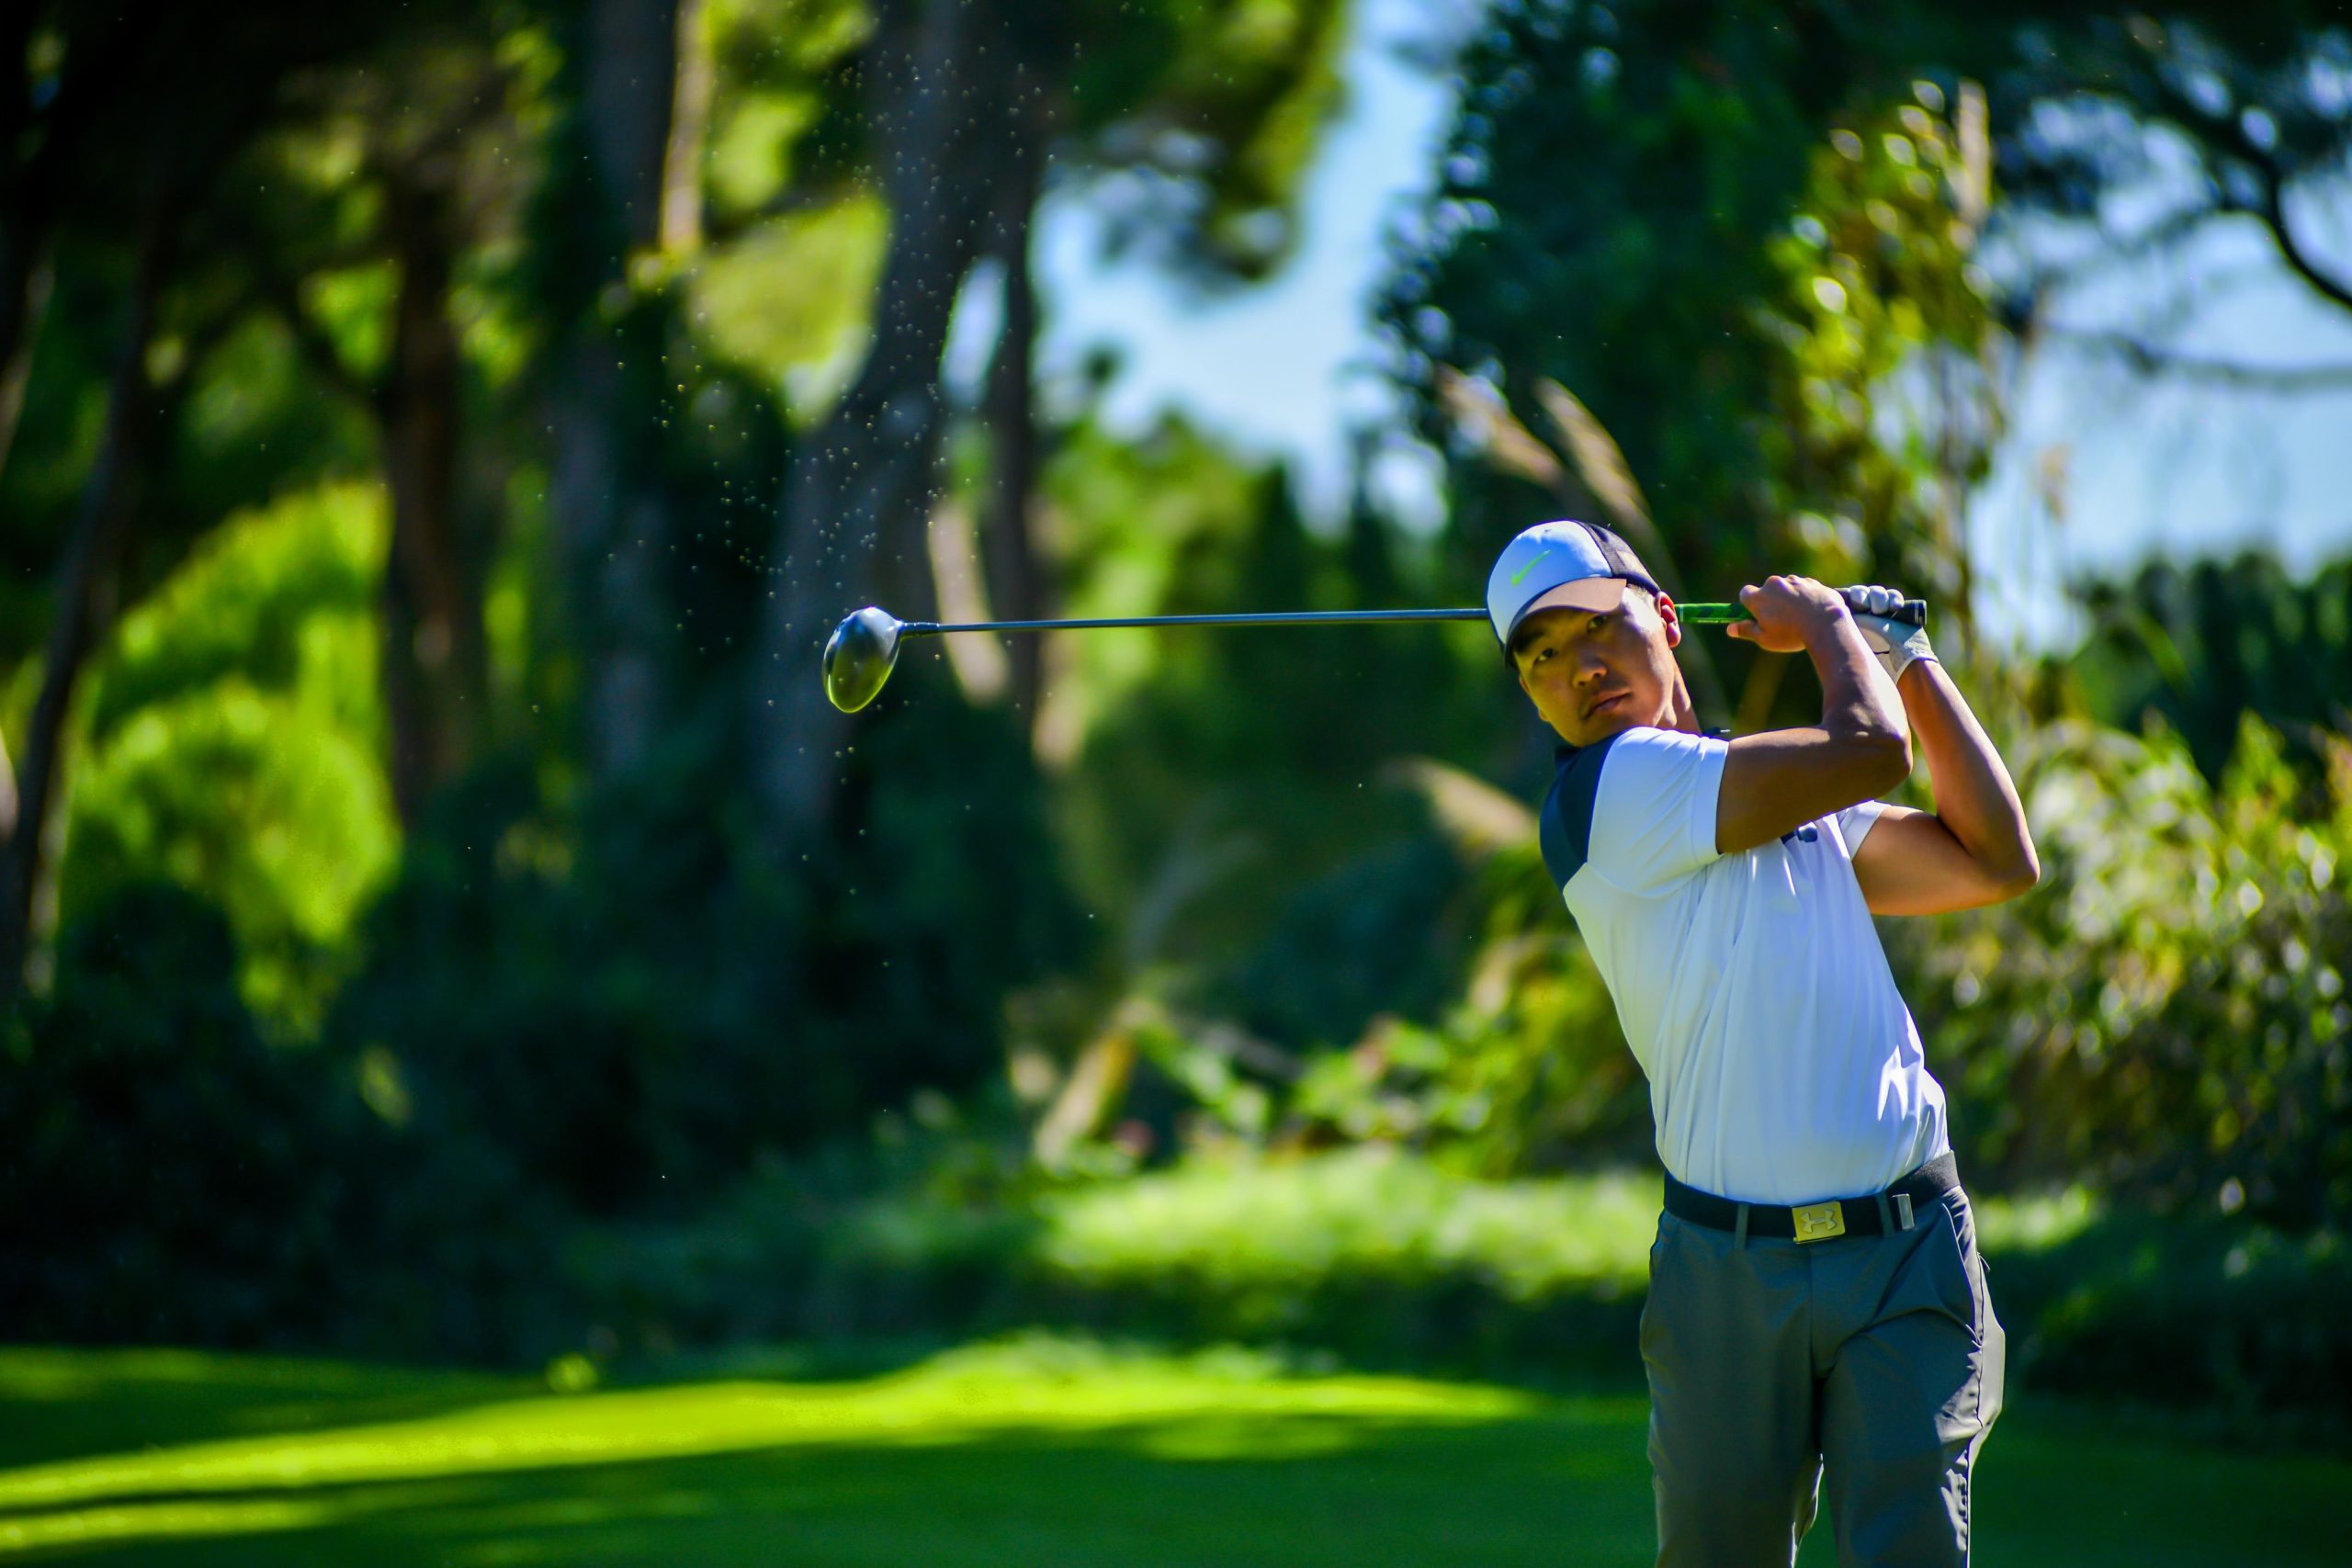 Man playing golf in mid-swing against a blurred background of green grass and trees. Degenerative disc disease treatment options